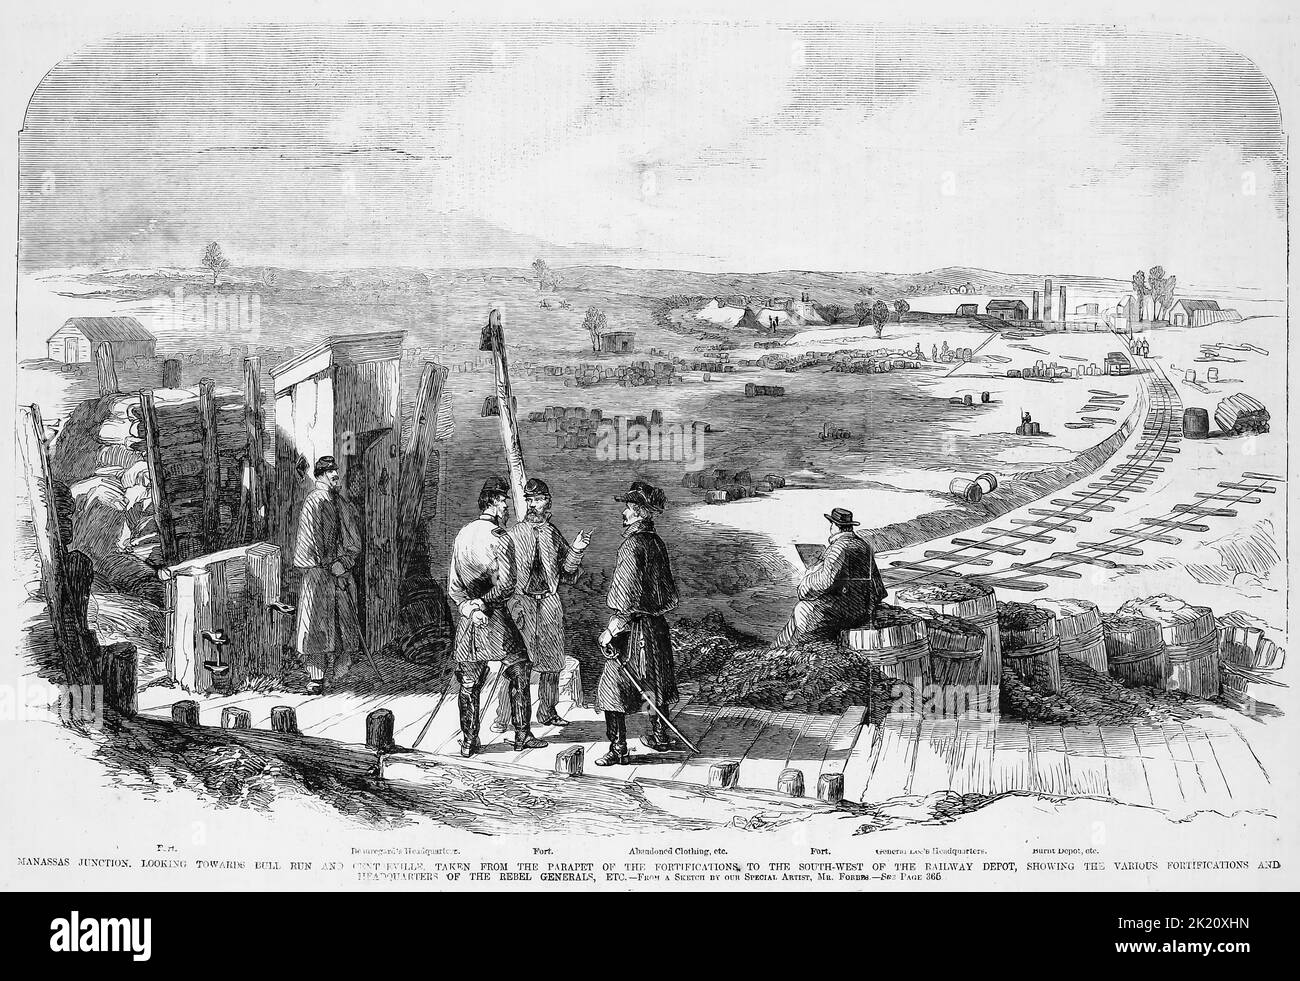 Manassas Junction, looking towards Bull Run and Centreville, Virginia, taken from the parapet of the fortifications to the southwest of the railway depot, showing the various fortifications and headquarters of the Rebel Generals, etc. April 1862. 19th century American Civil War illustration from Frank Leslie's Illustrated Newspaper Stock Photo